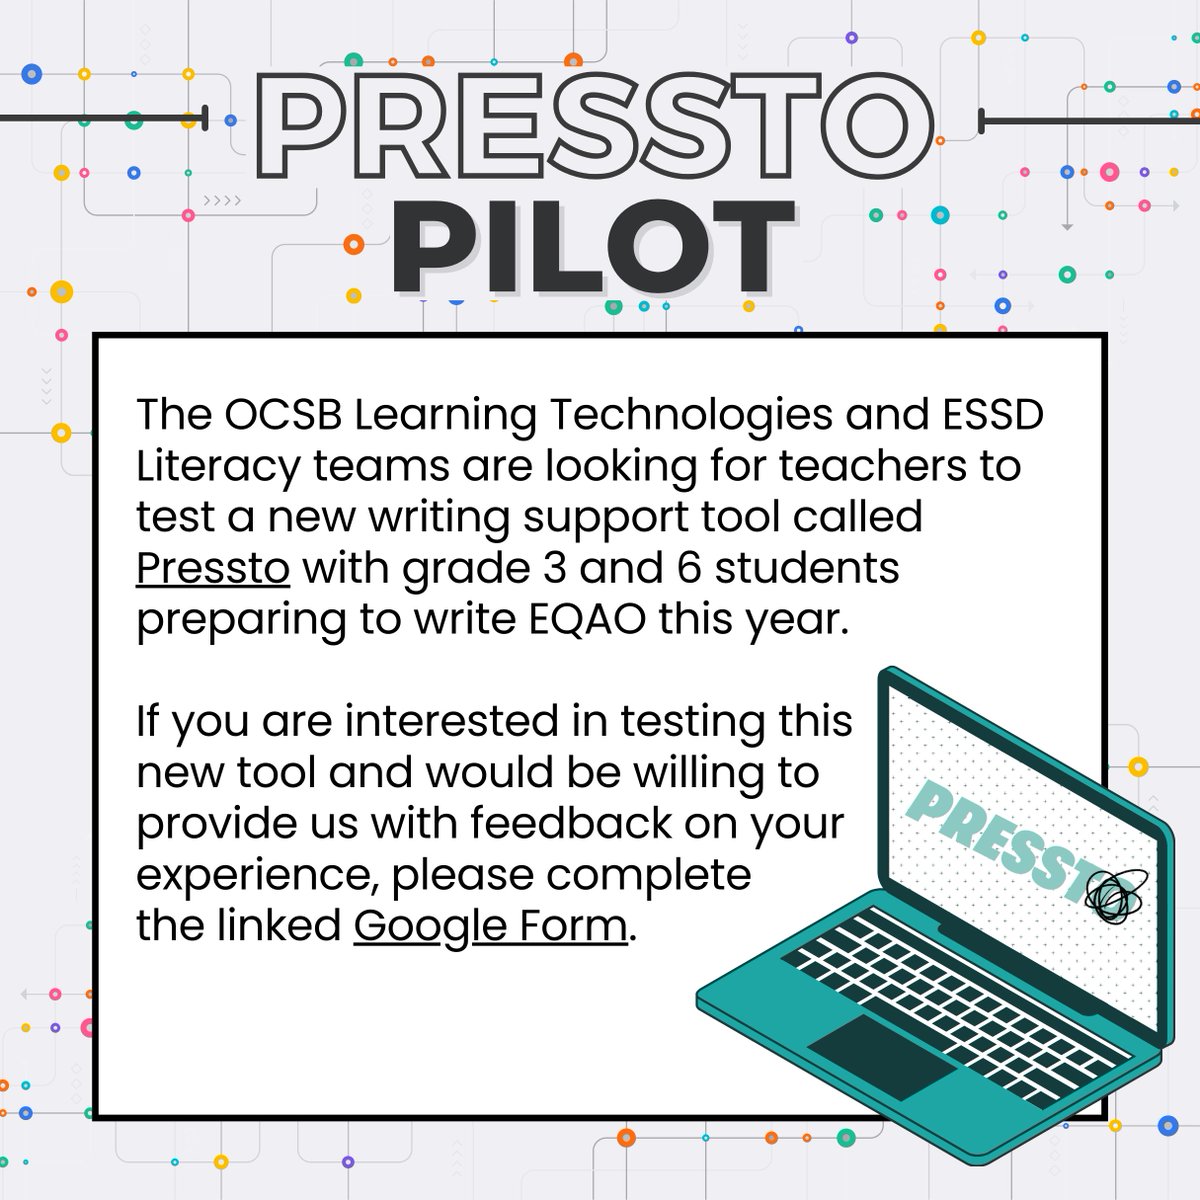 📣Calling all grade 3 and grade 6 #ocsb Language teachers! We're looking for educators to pilot a writing support tool called Pressto. If interested, please complete this form: bit.ly/ocsbpressto @lindajolic @OCSBelementary